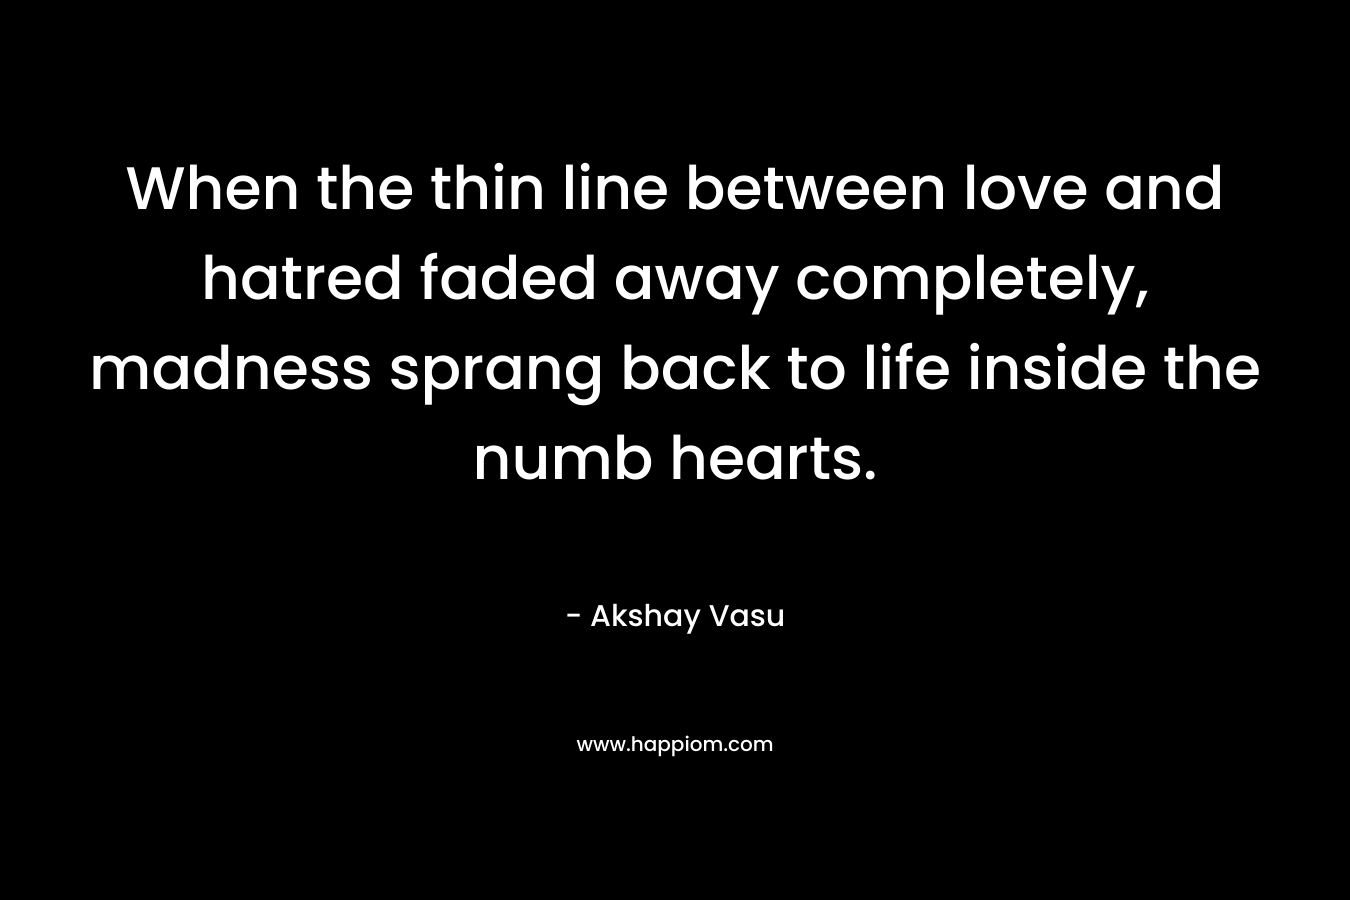 When the thin line between love and hatred faded away completely, madness sprang back to life inside the numb hearts. – Akshay Vasu